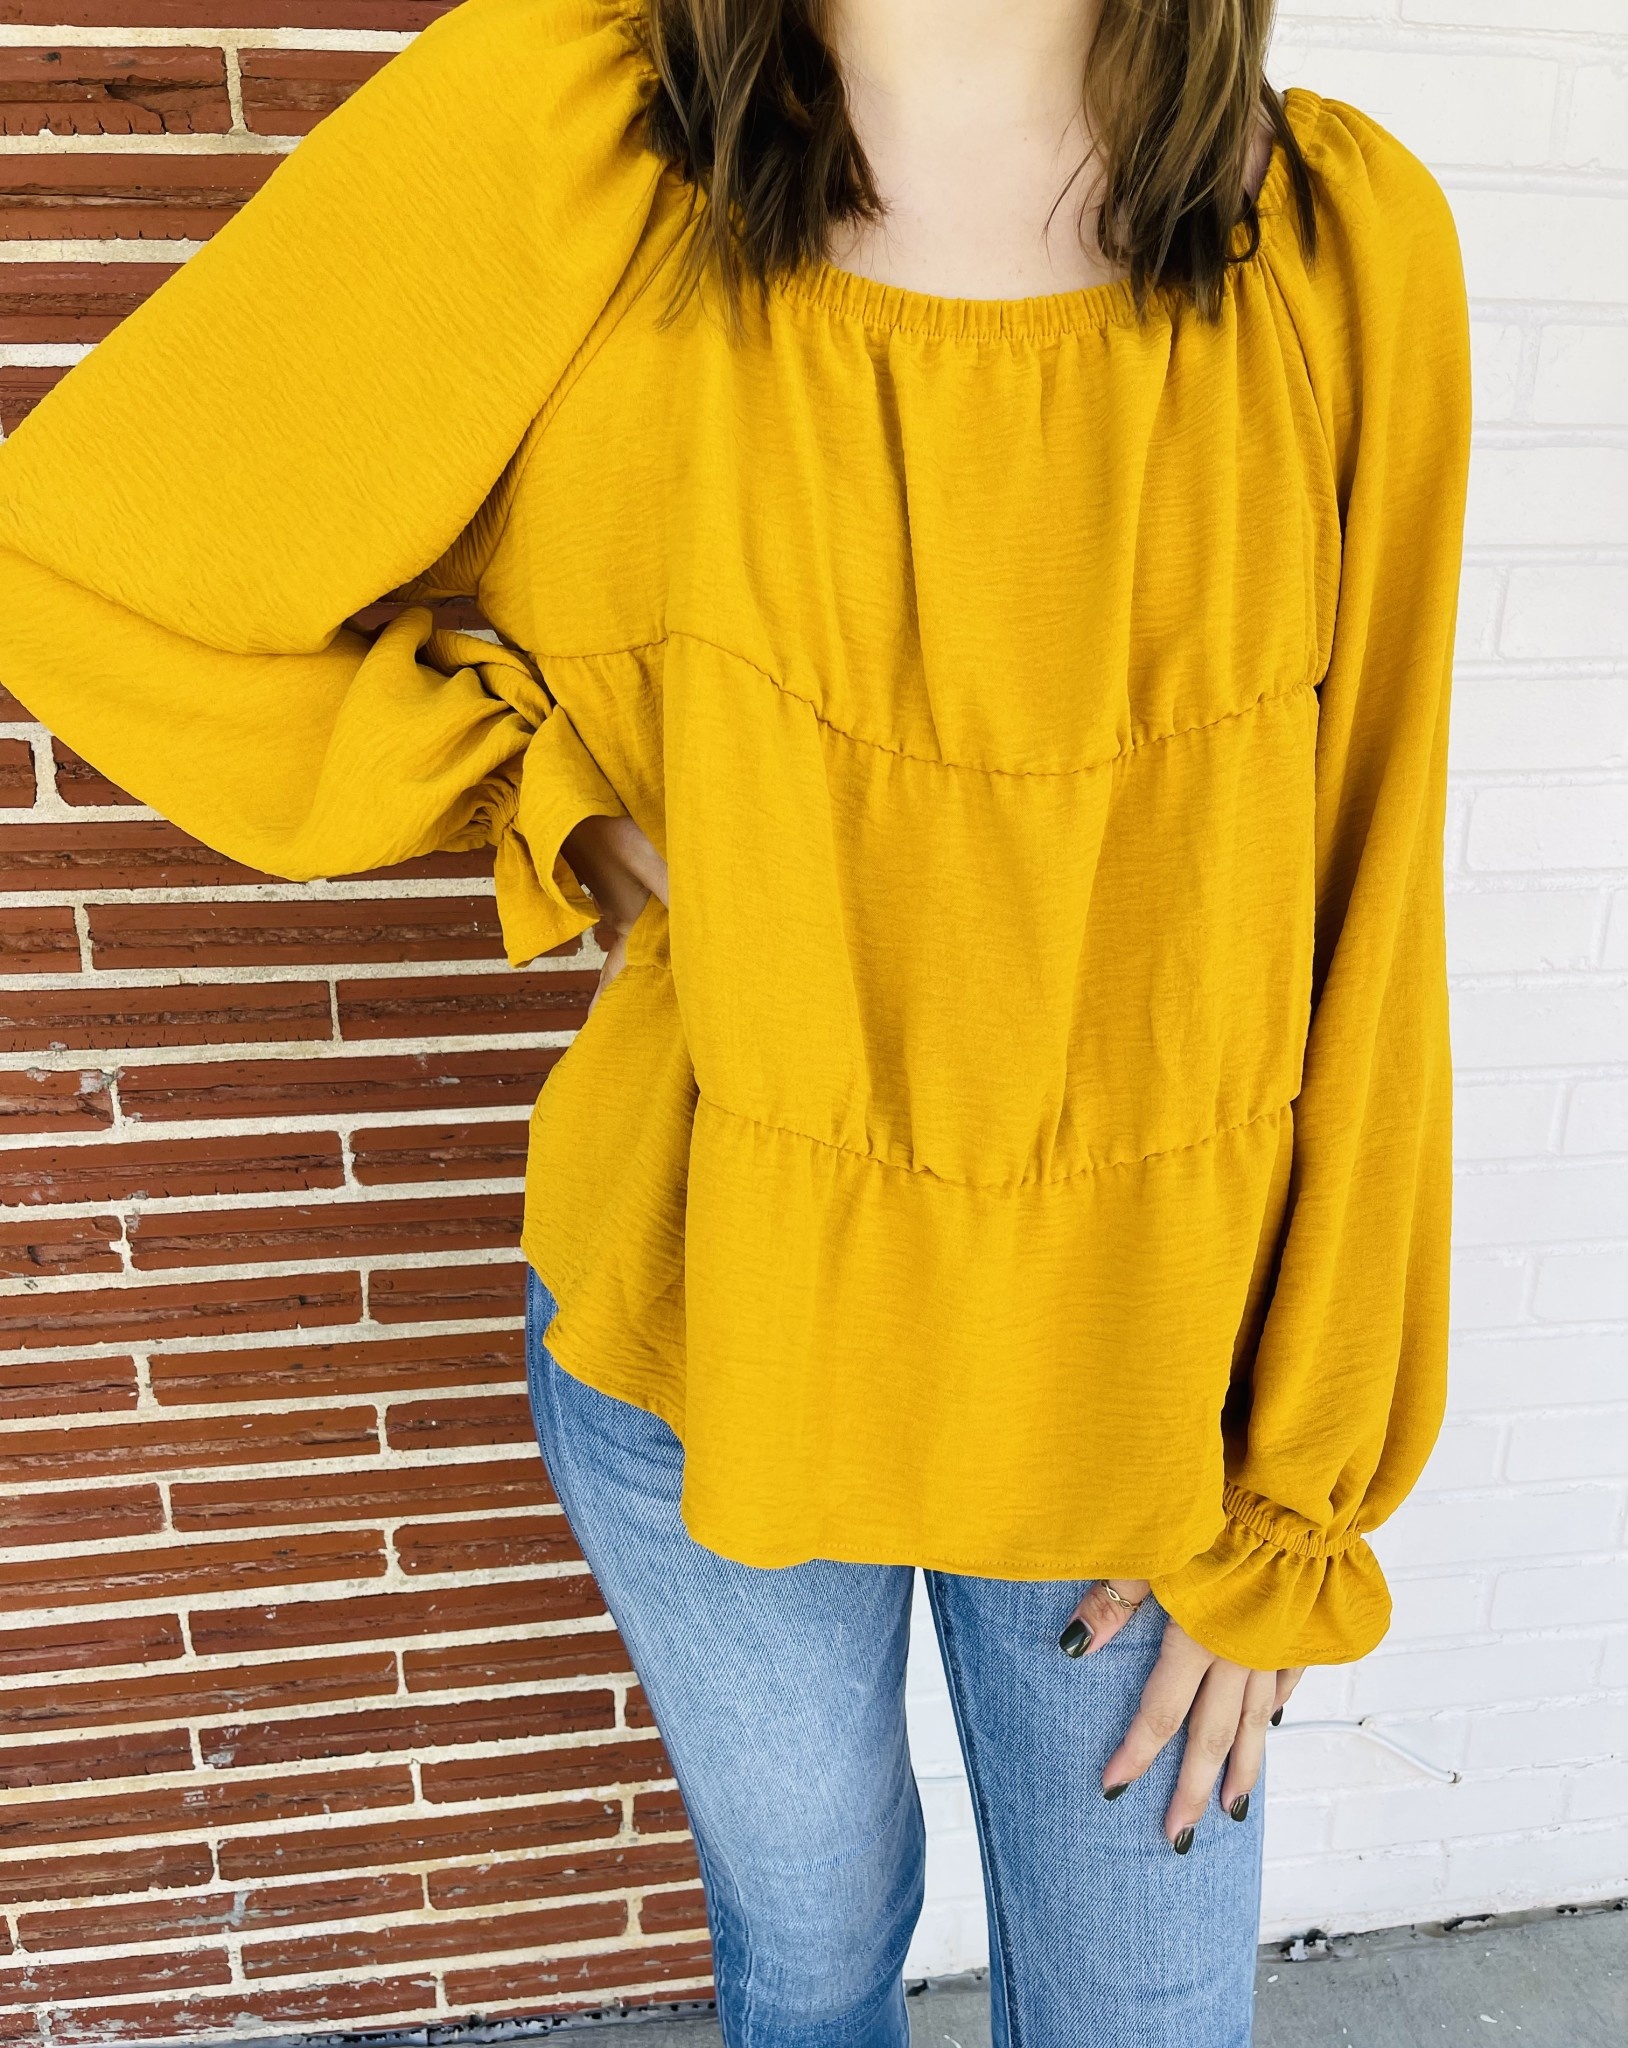 GeeGee Tiered Top with Ruffle Cuff - Mustard - COVINGTON CHARM